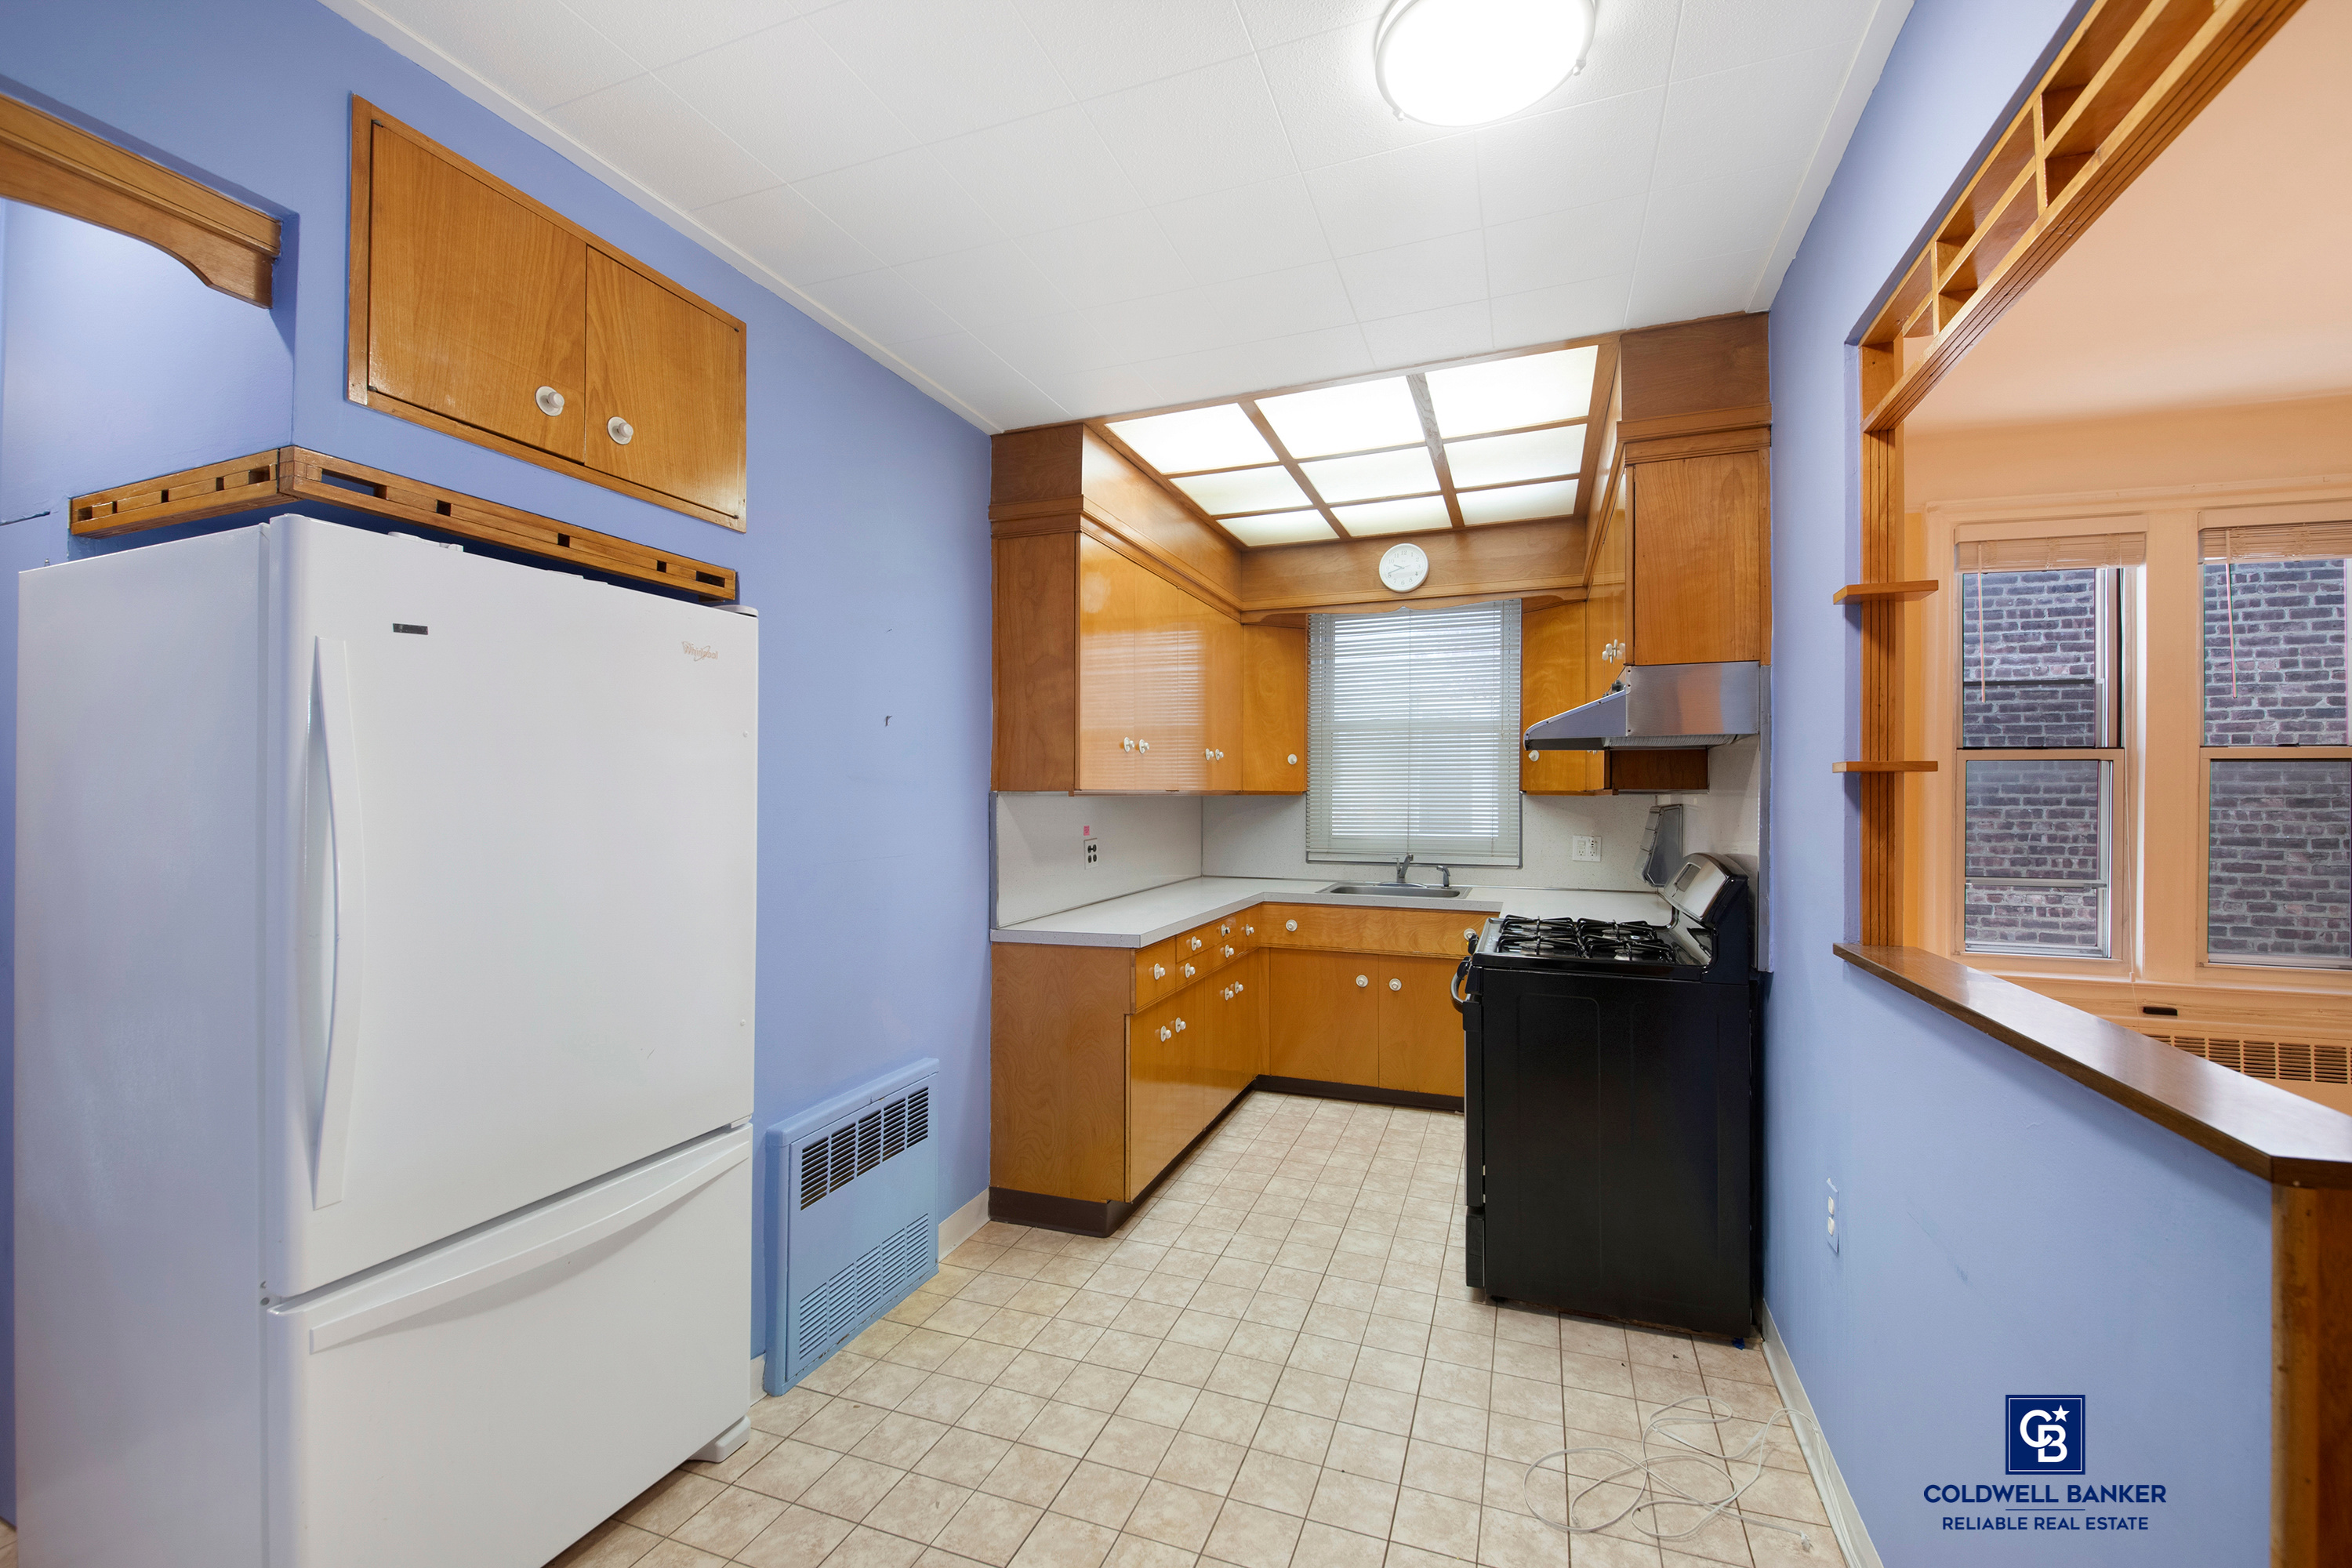 457 84th Street, Brooklyn, New York, 11209, United States, 6 Bedrooms Bedrooms, ,3 BathroomsBathrooms,Residential,For Sale,457 84th Street,1506642